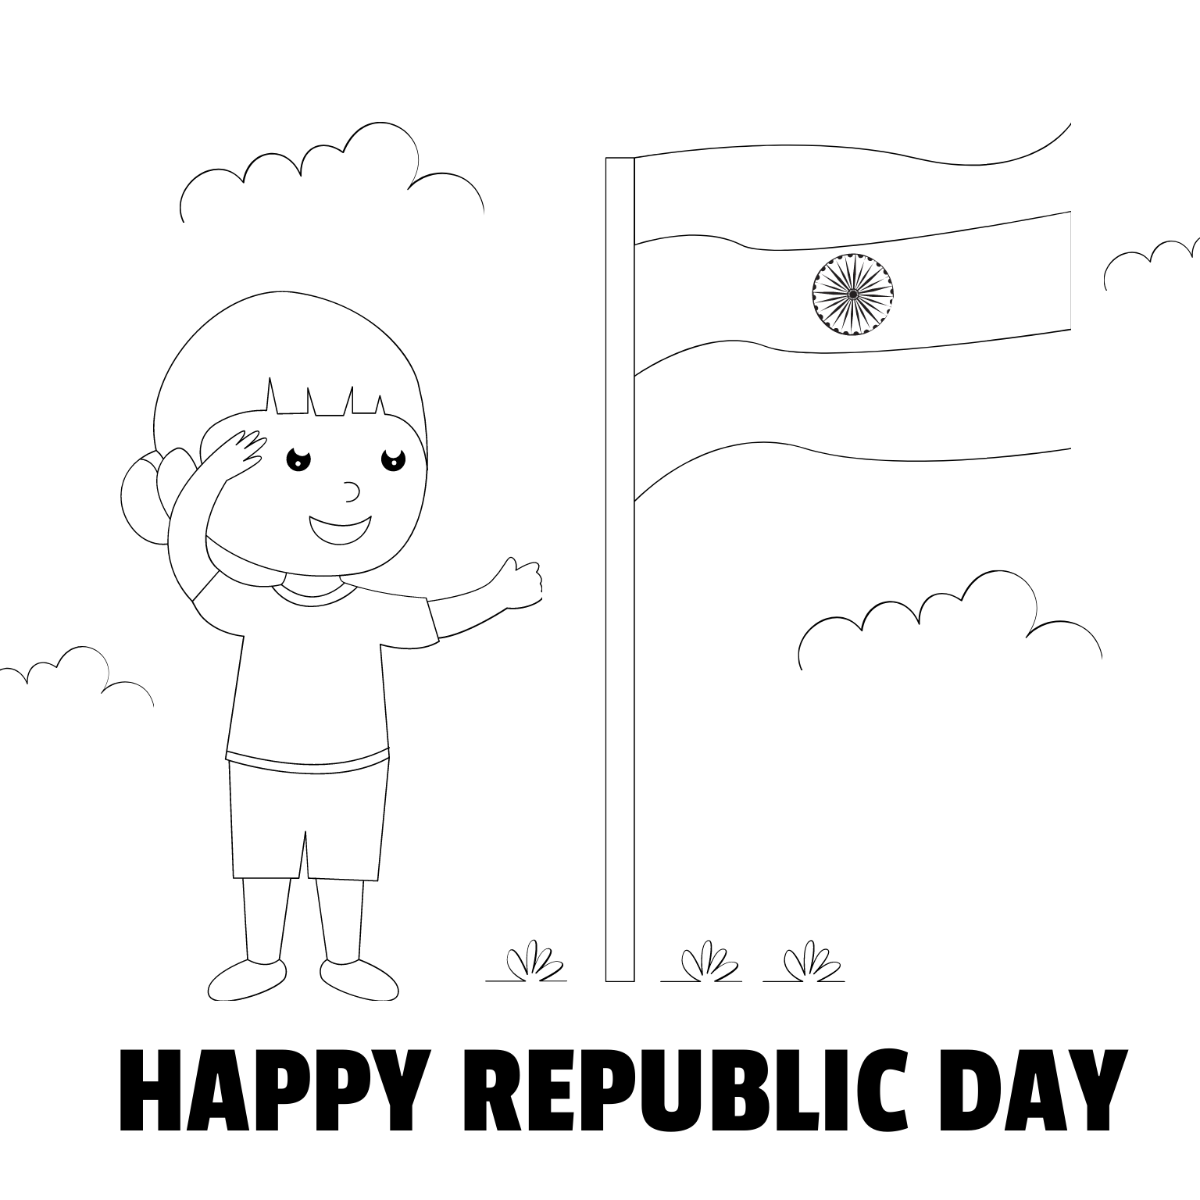 REPUBLIC DAY Flag Drawing by MLSPcArt on Dribbble-saigonsouth.com.vn